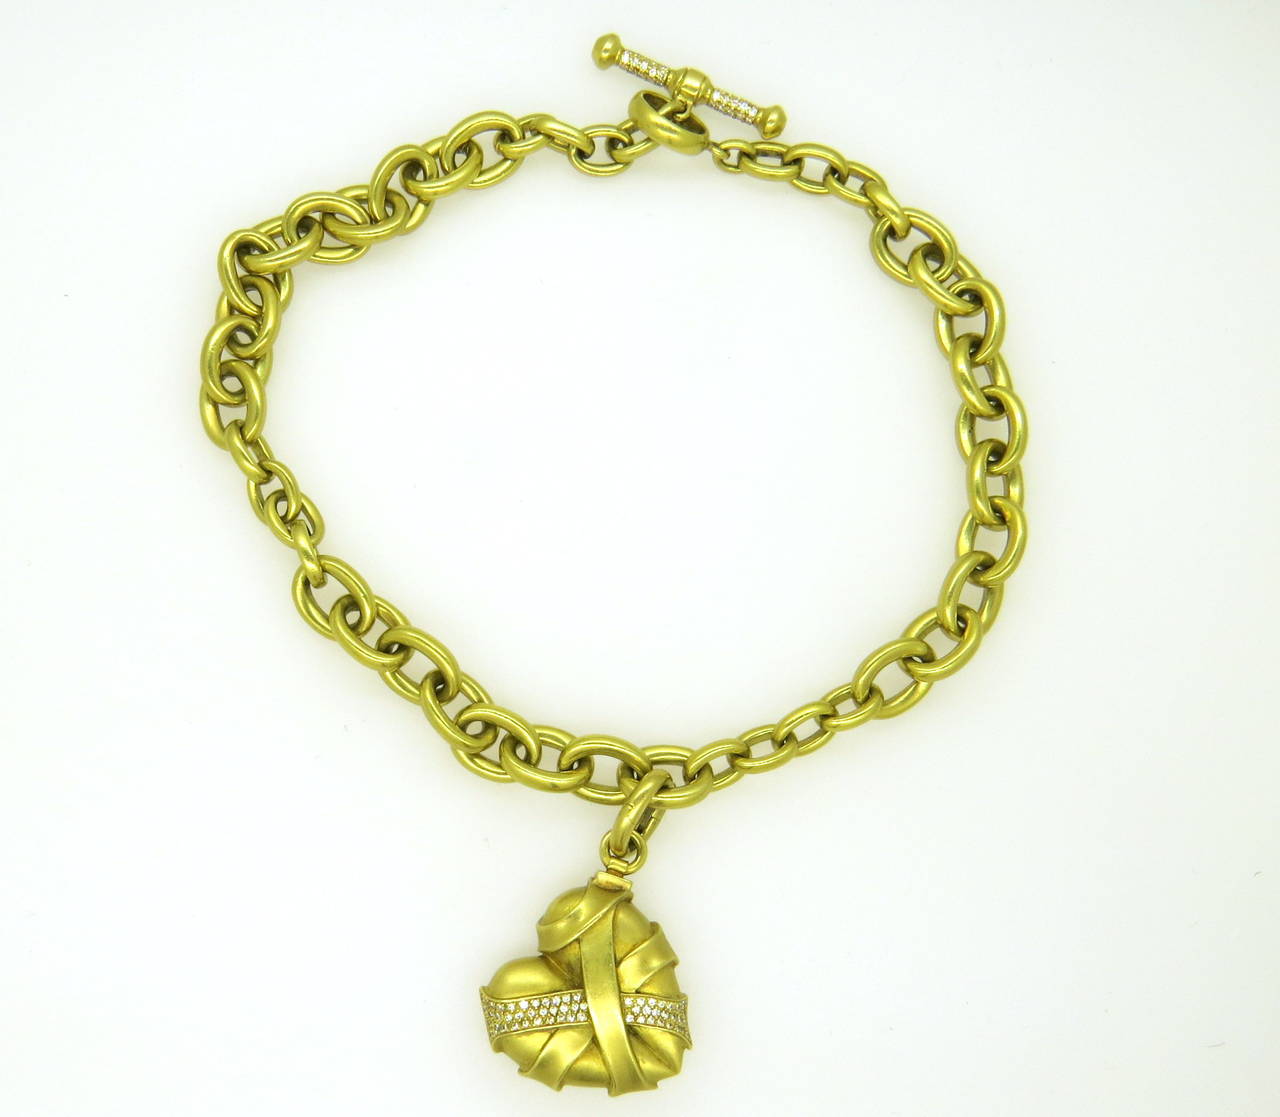 Massive 18k gold link chain necklace by Barry Kieselstein-Cord, with diamond toggle closure. Necklace is 18